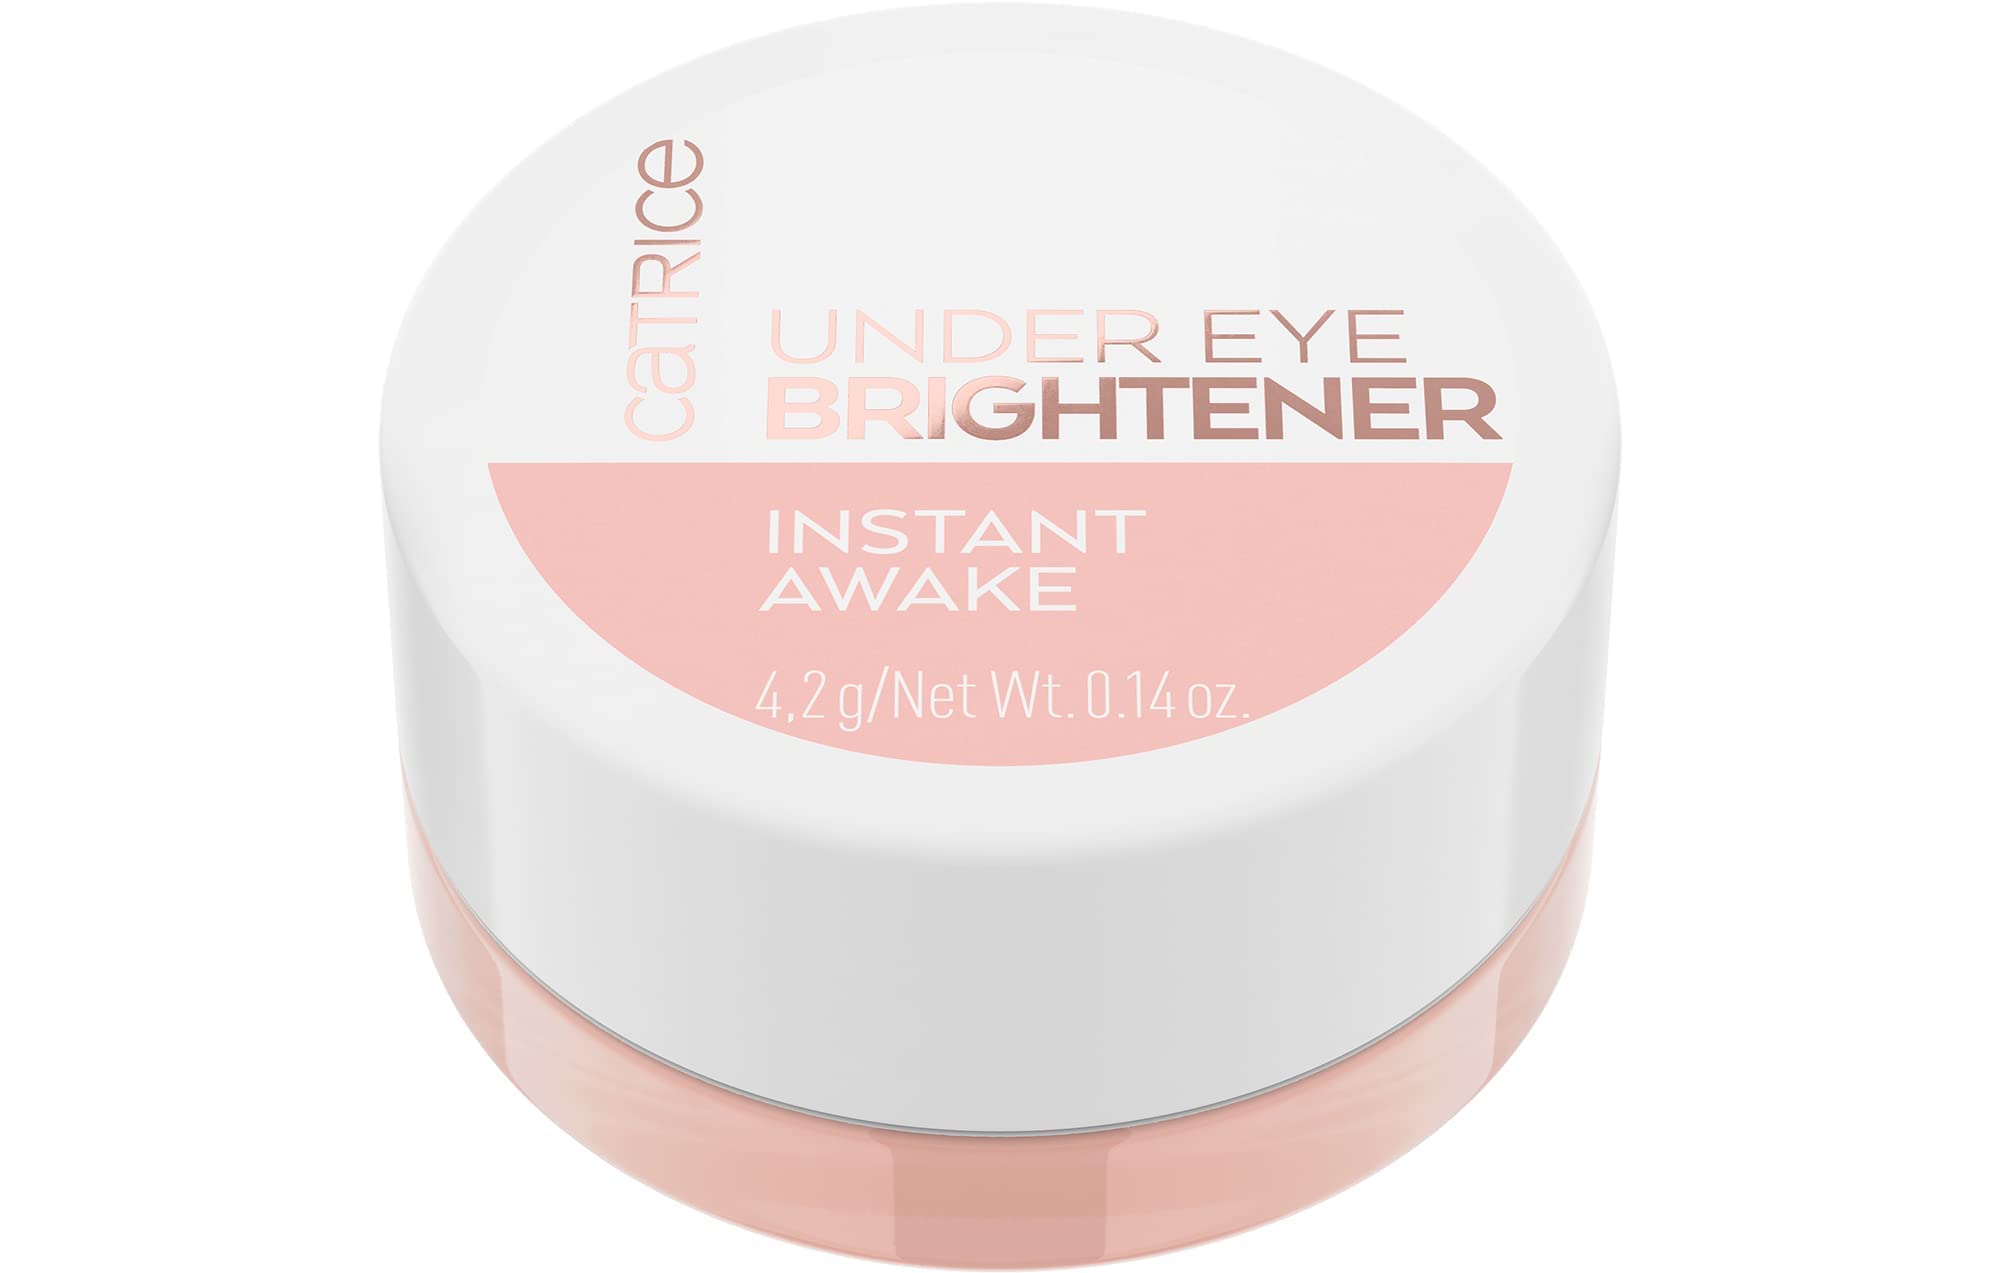 Catrice | Under Eye Brightener | Conceal & Brighten Dark Circles | With Hyaluronic Acid & Shea Butter | Vegan & Cruelty Free | Made Without Parabens, Alcohol, & Microplastic Particles